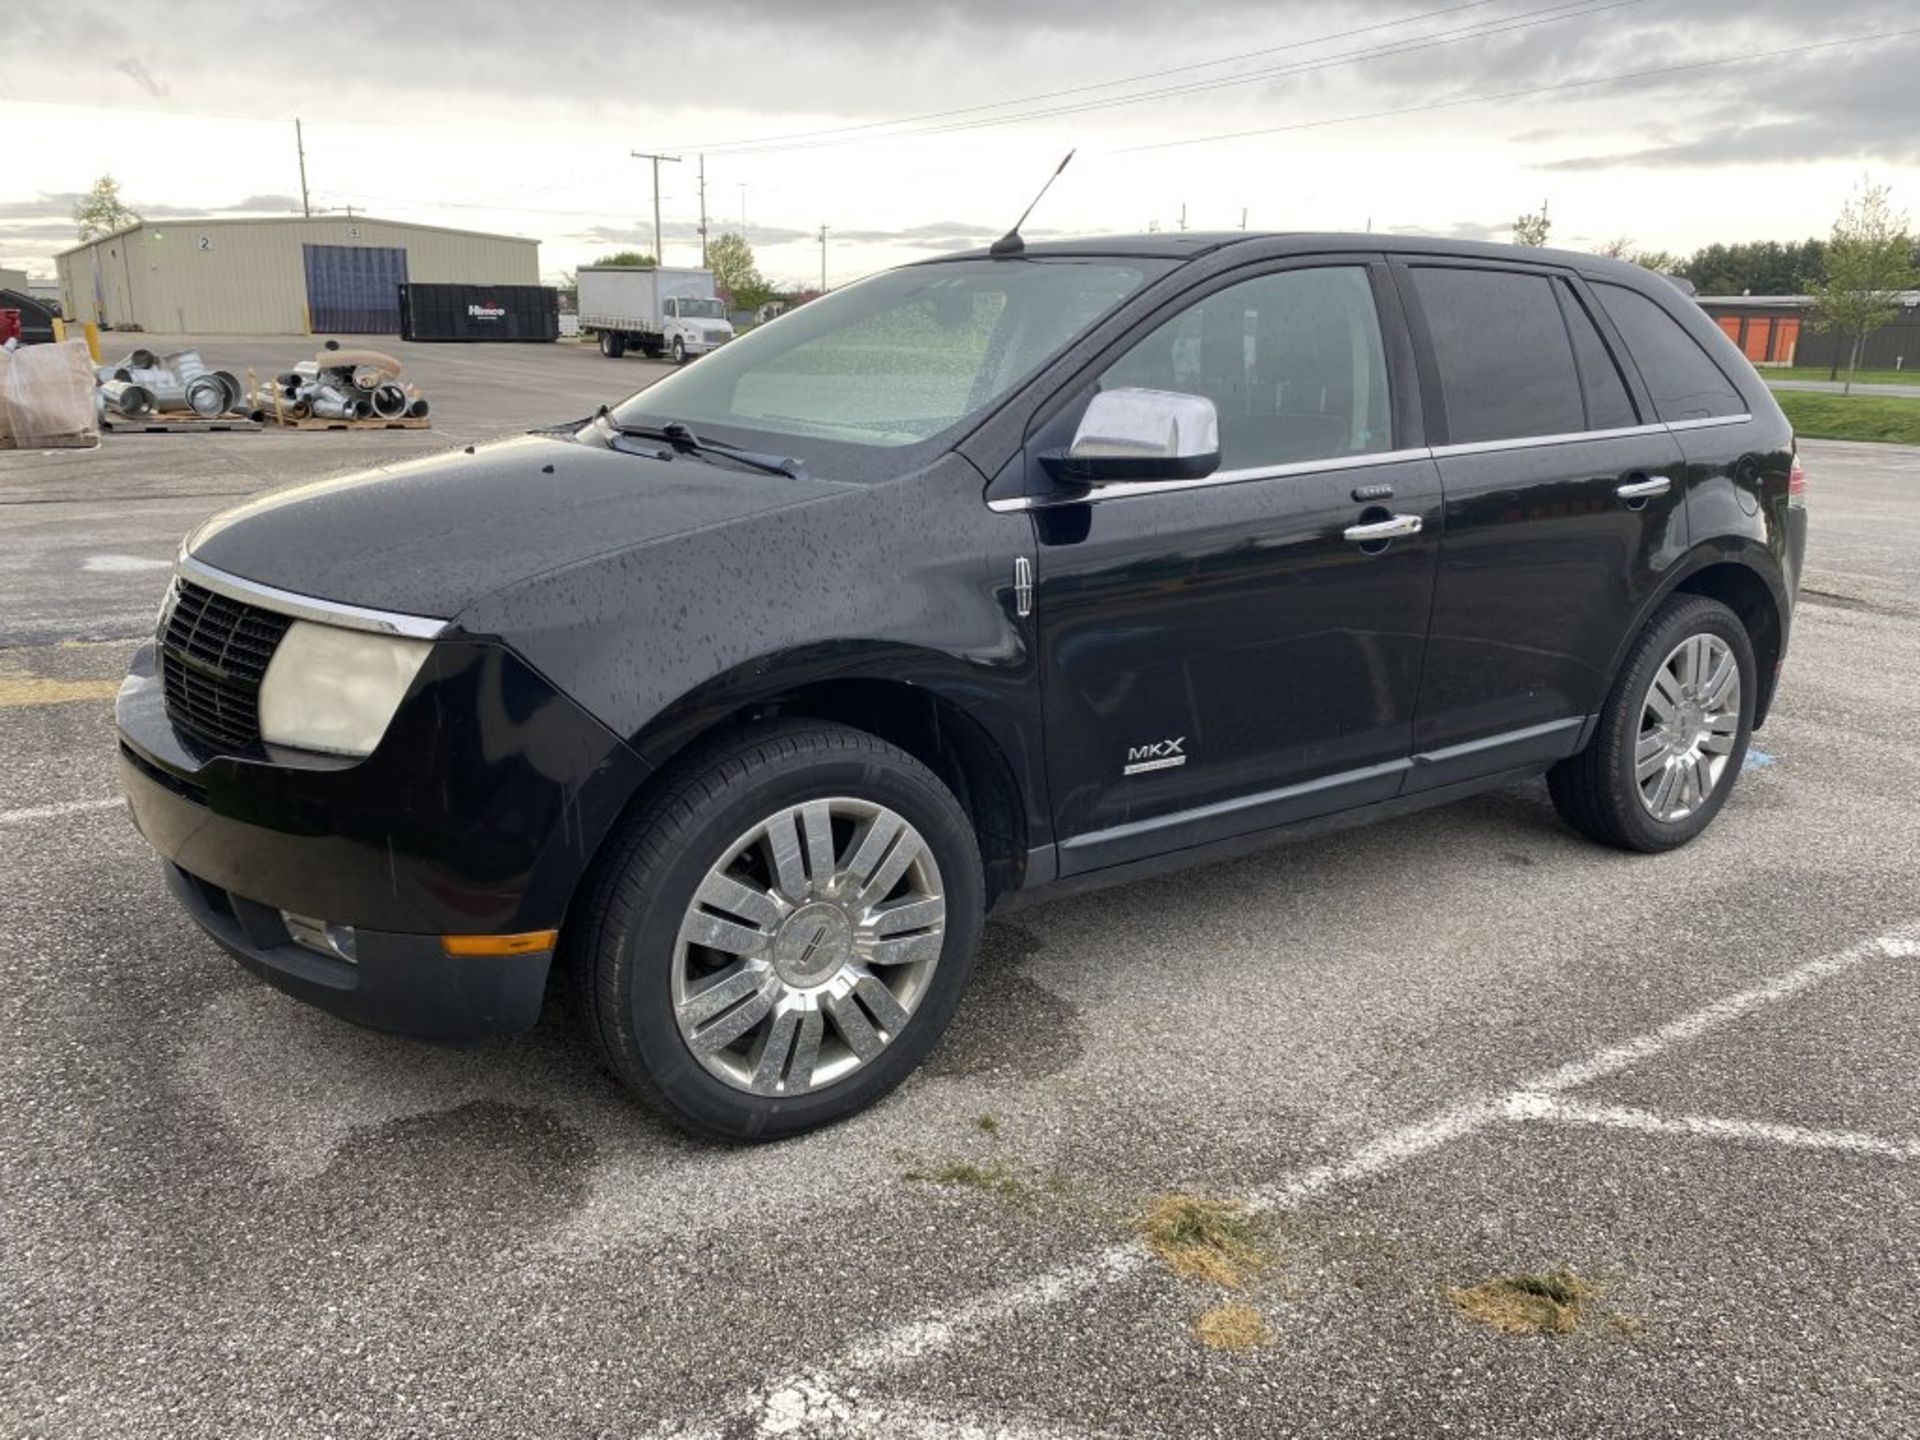 2008 LINCOLN MKX LIMITED EDITION, AUTO TRANS, AM/FM-CD-AUX, HEAT/AC SEATS, MOONROOF, PW, PL,